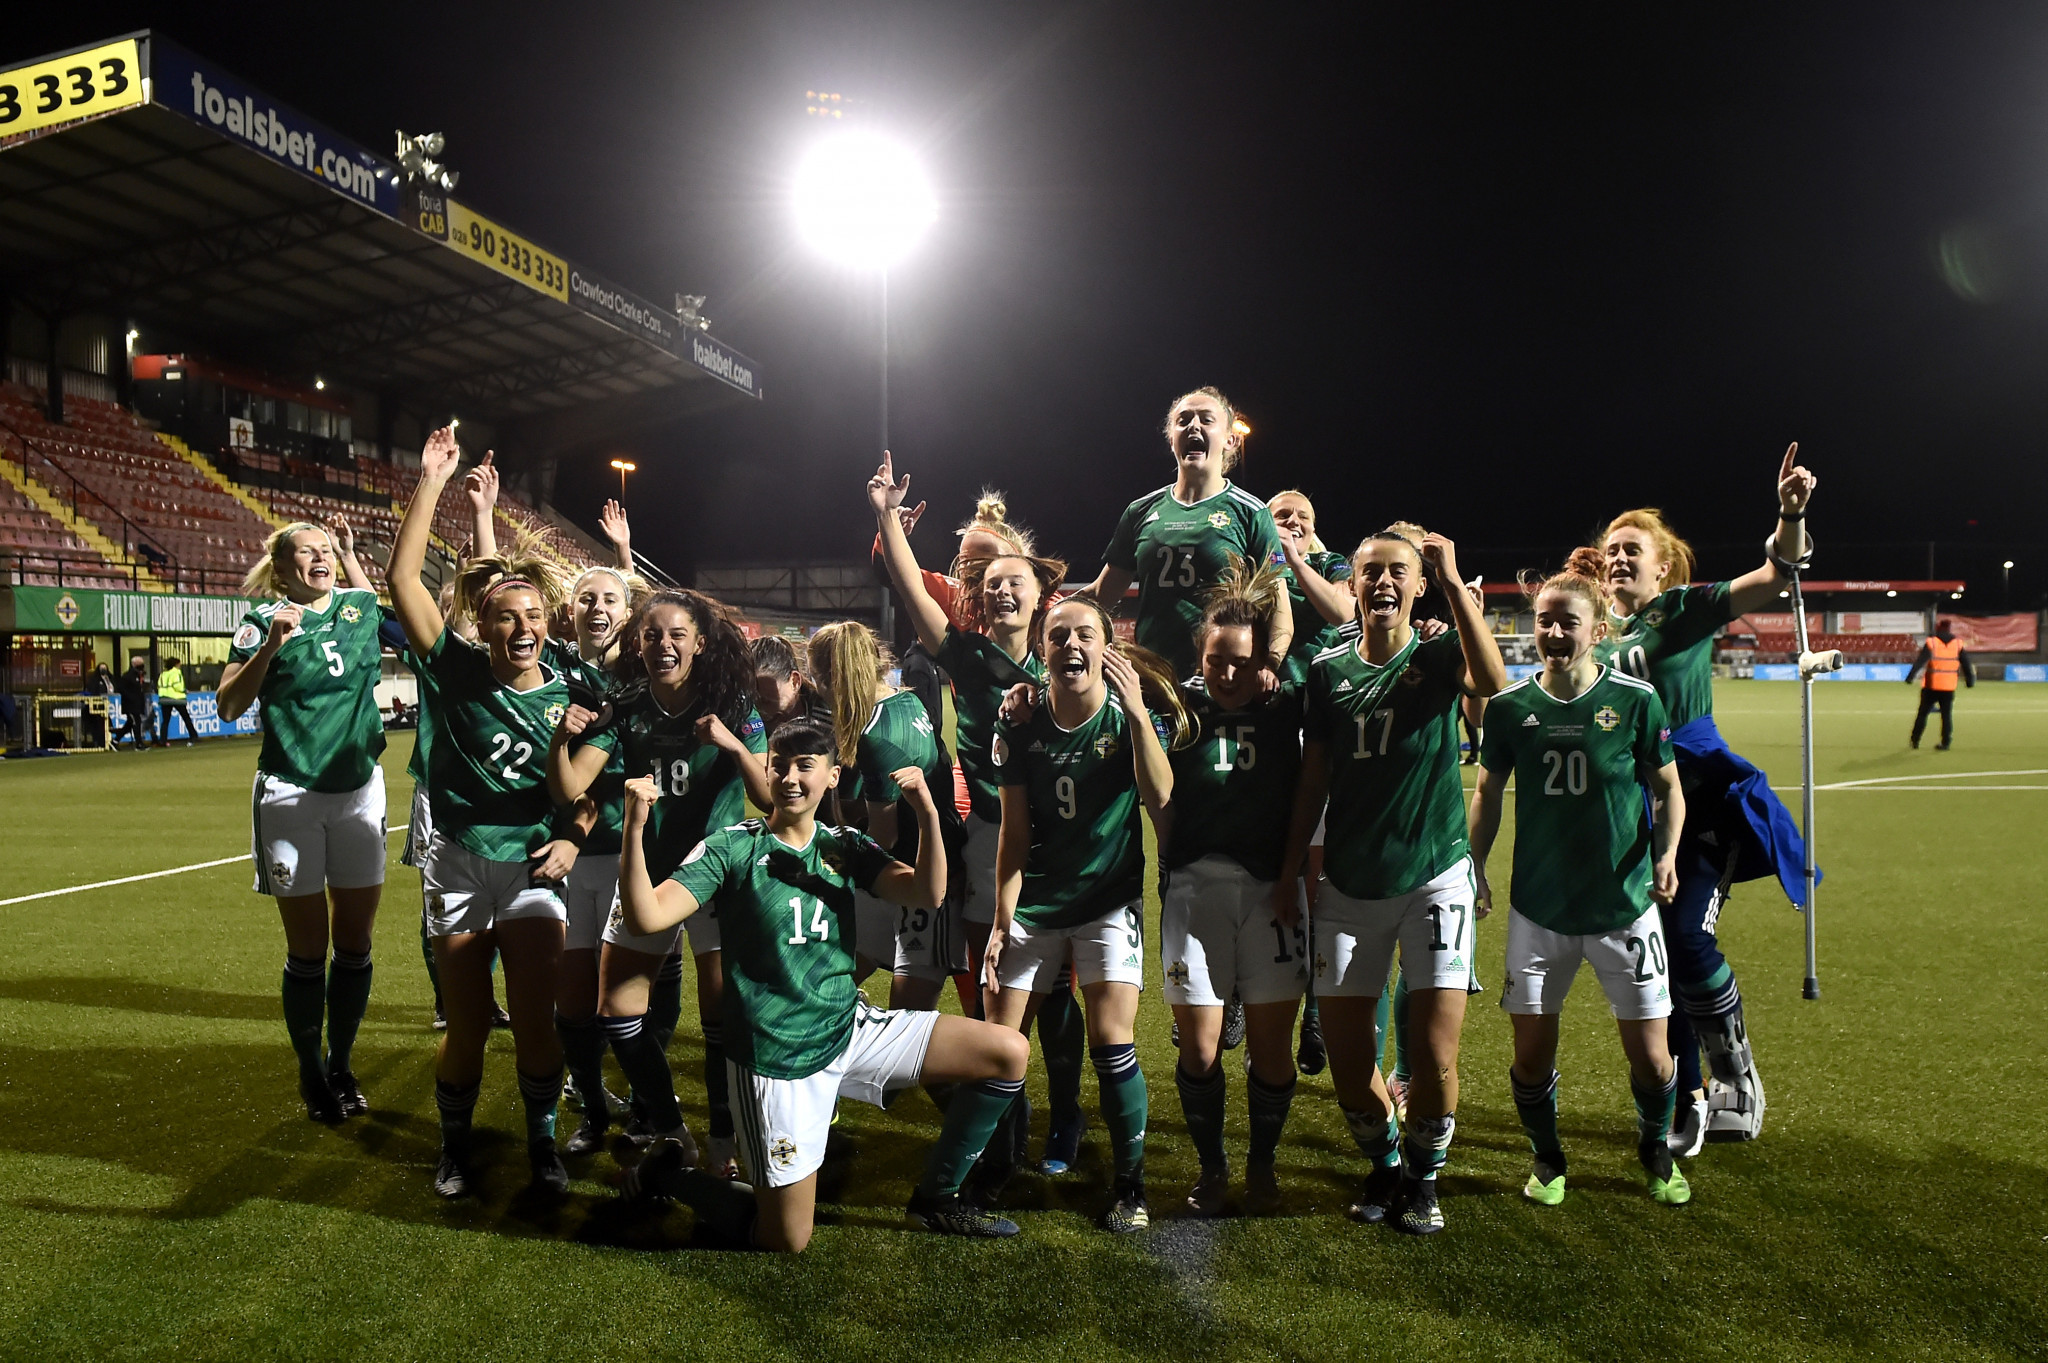 Northern Ireland's women's football team qualified for their first major tournament, next year's Euros in England ©Getty Images